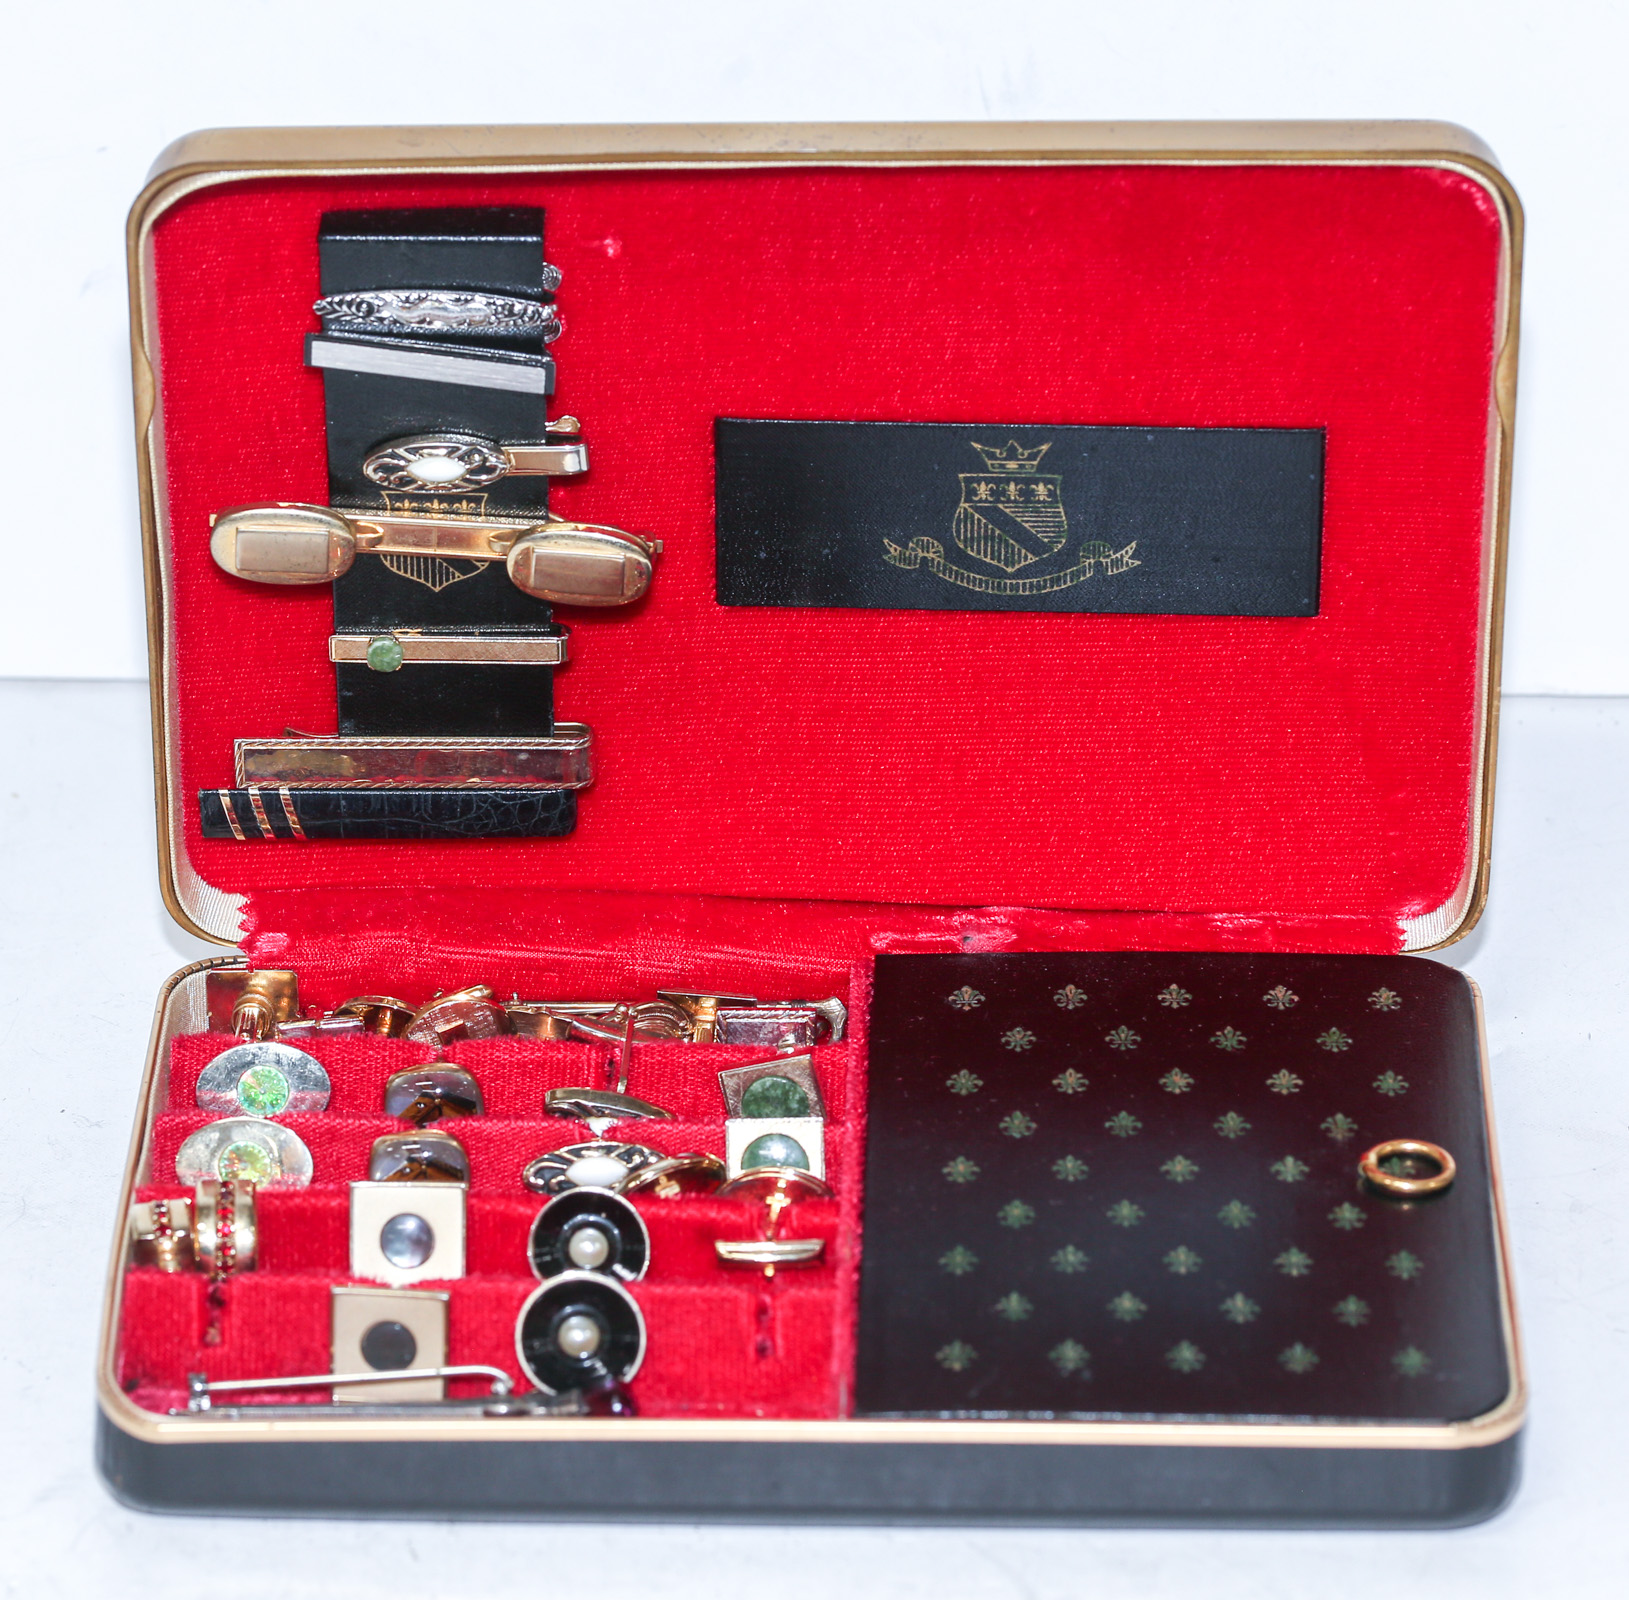 A JEWELRY BOX FILLED WITH CUFFLINKS